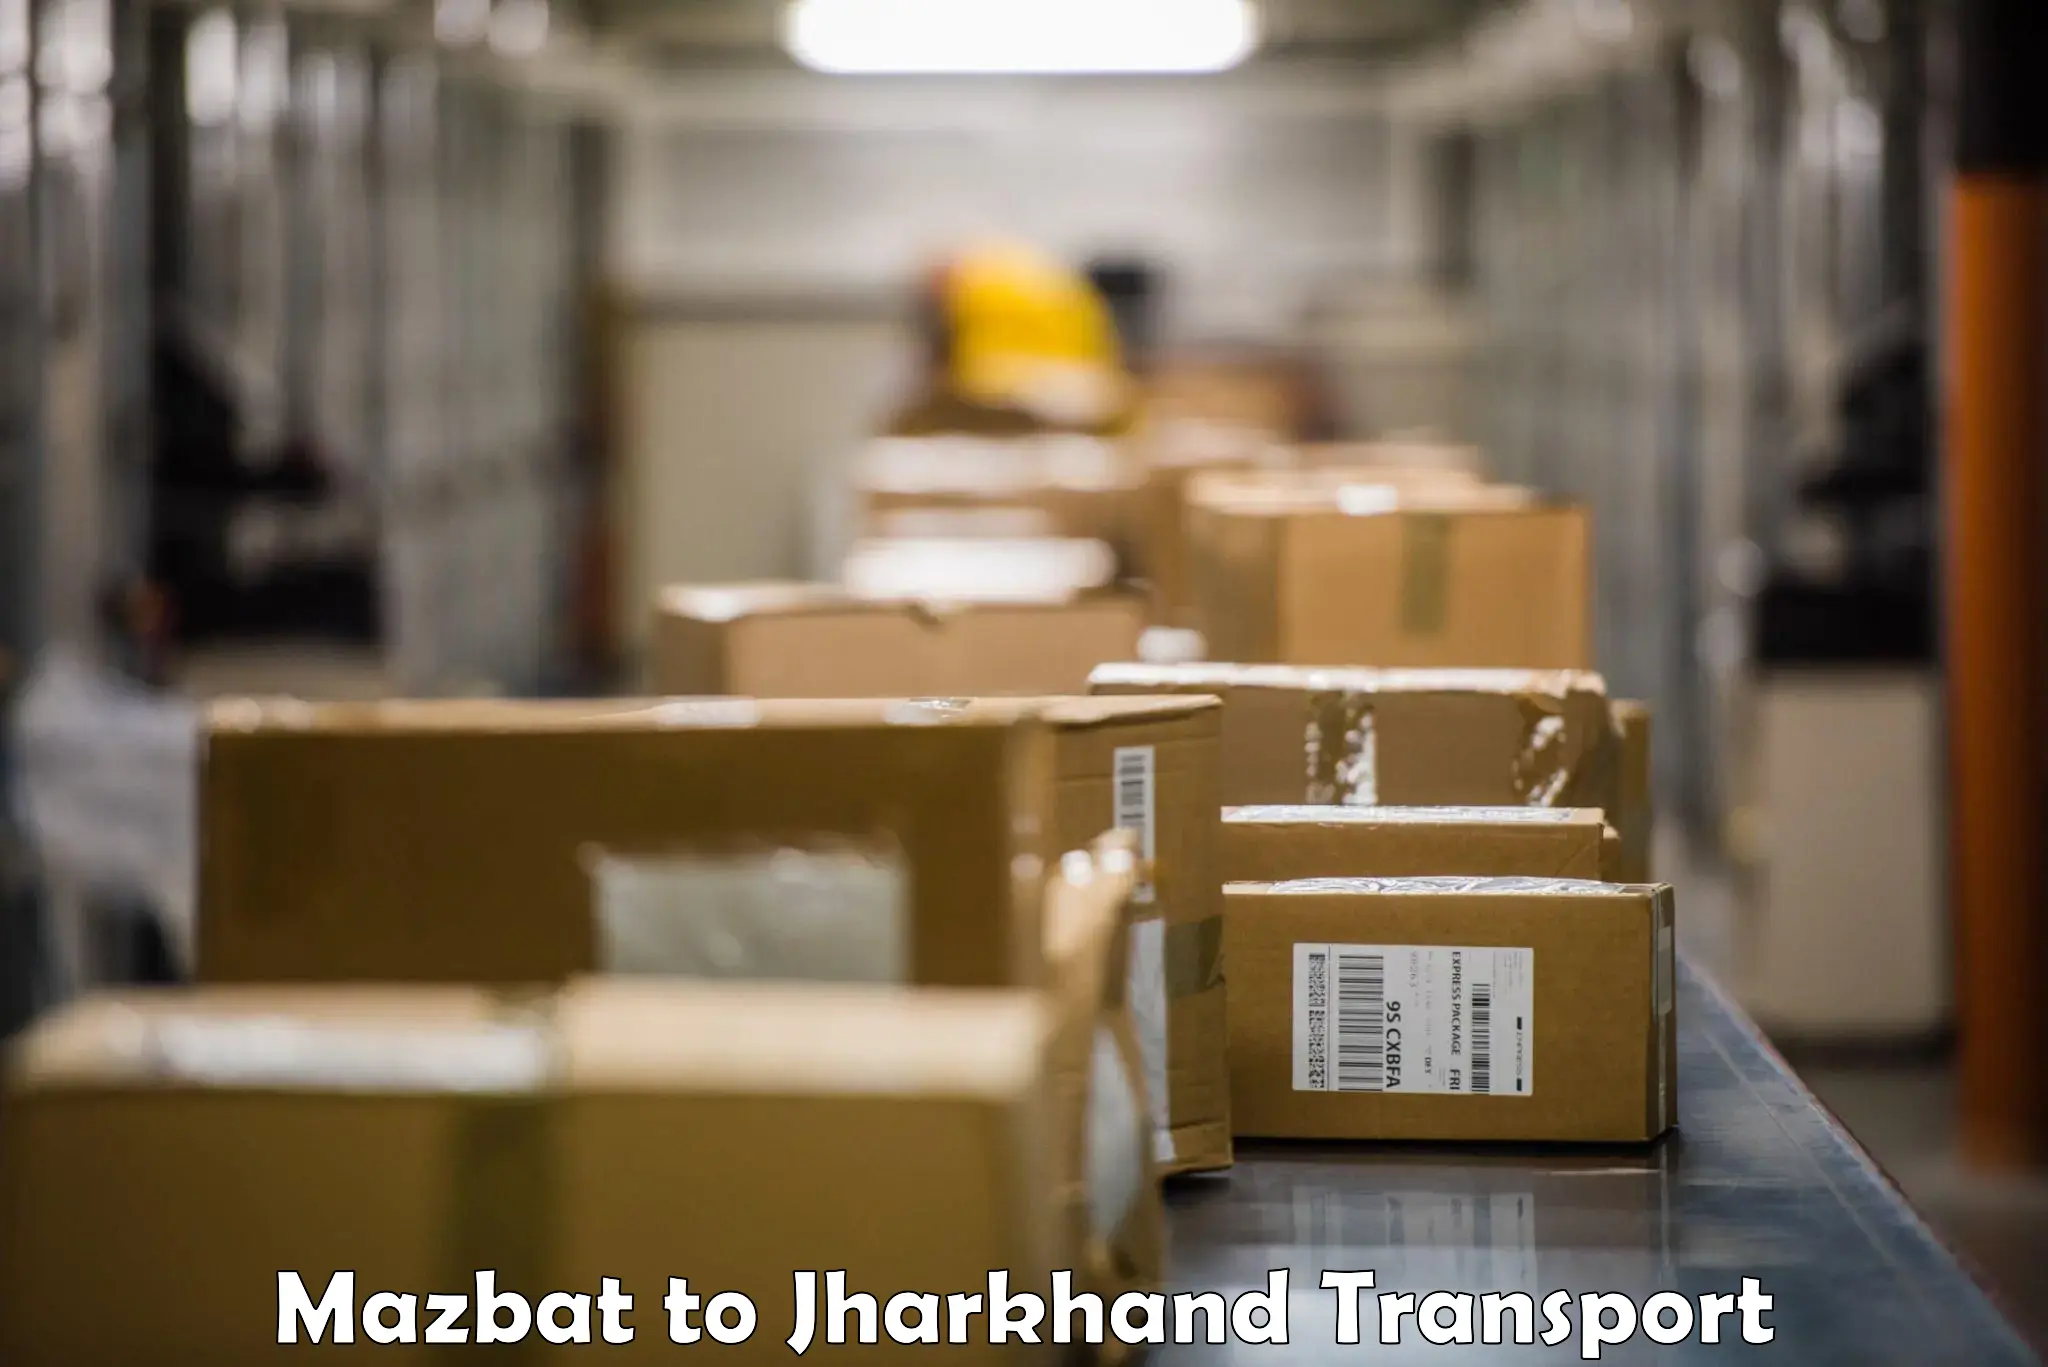 Delivery service Mazbat to Jharkhand